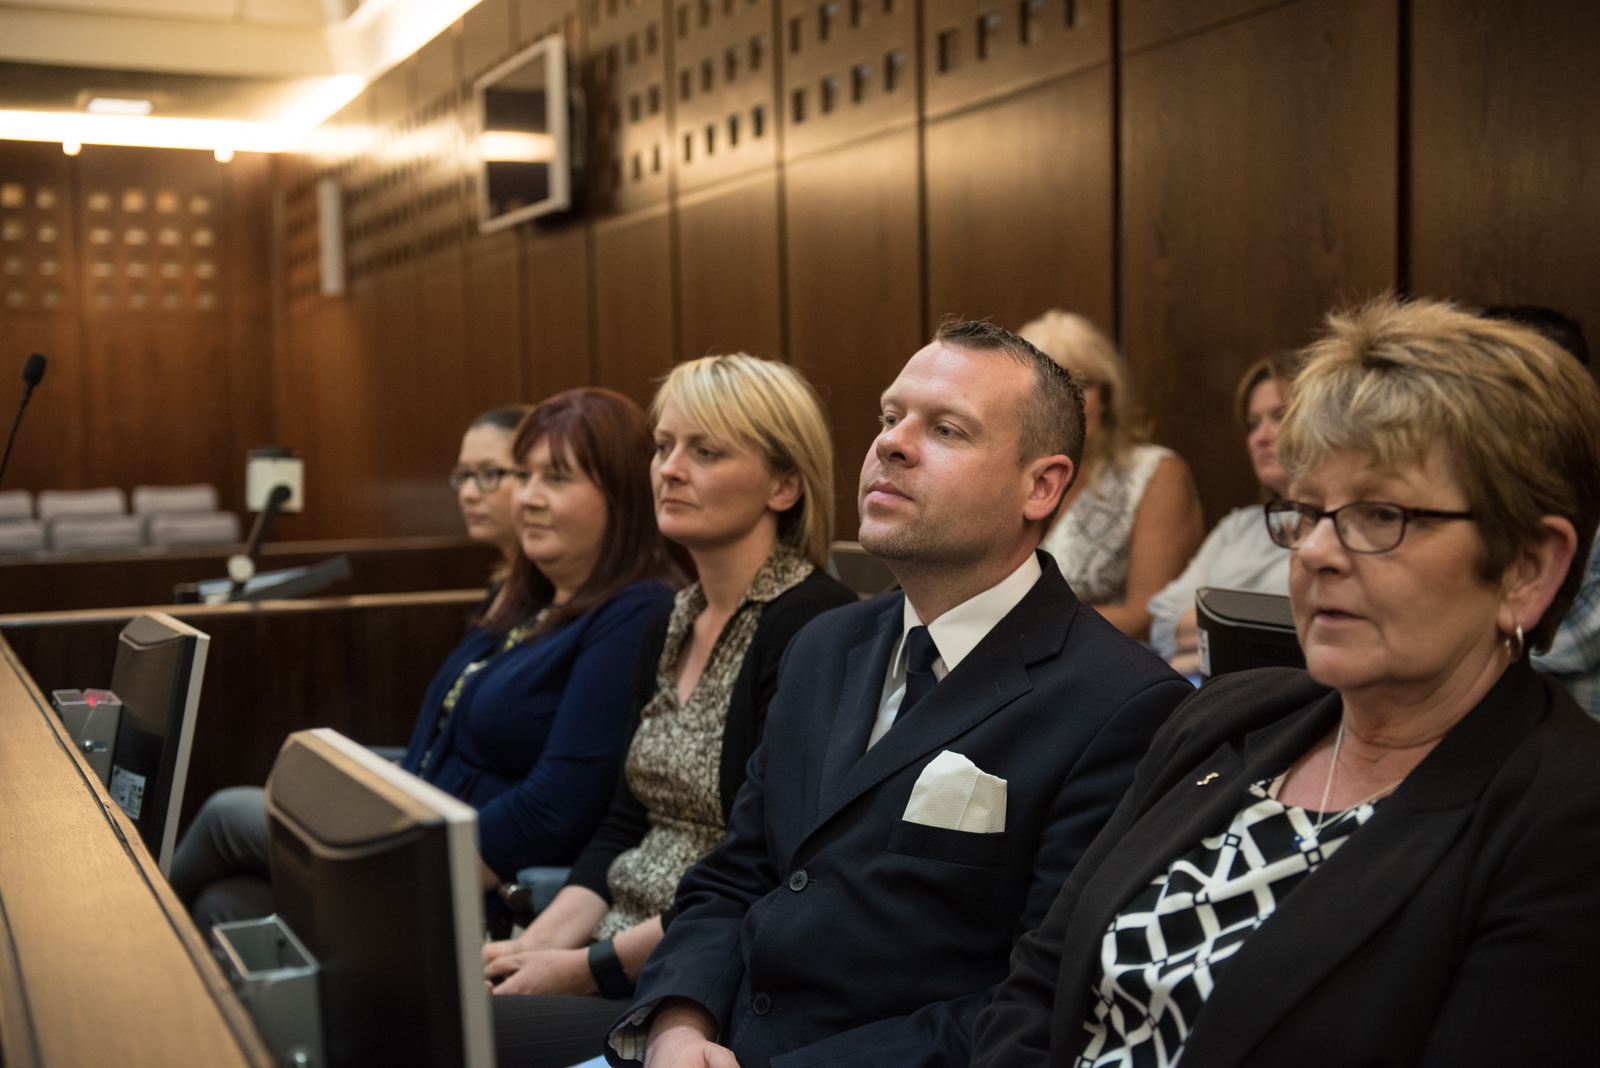 Could mock juries help revolutionise the Scottish legal system,?